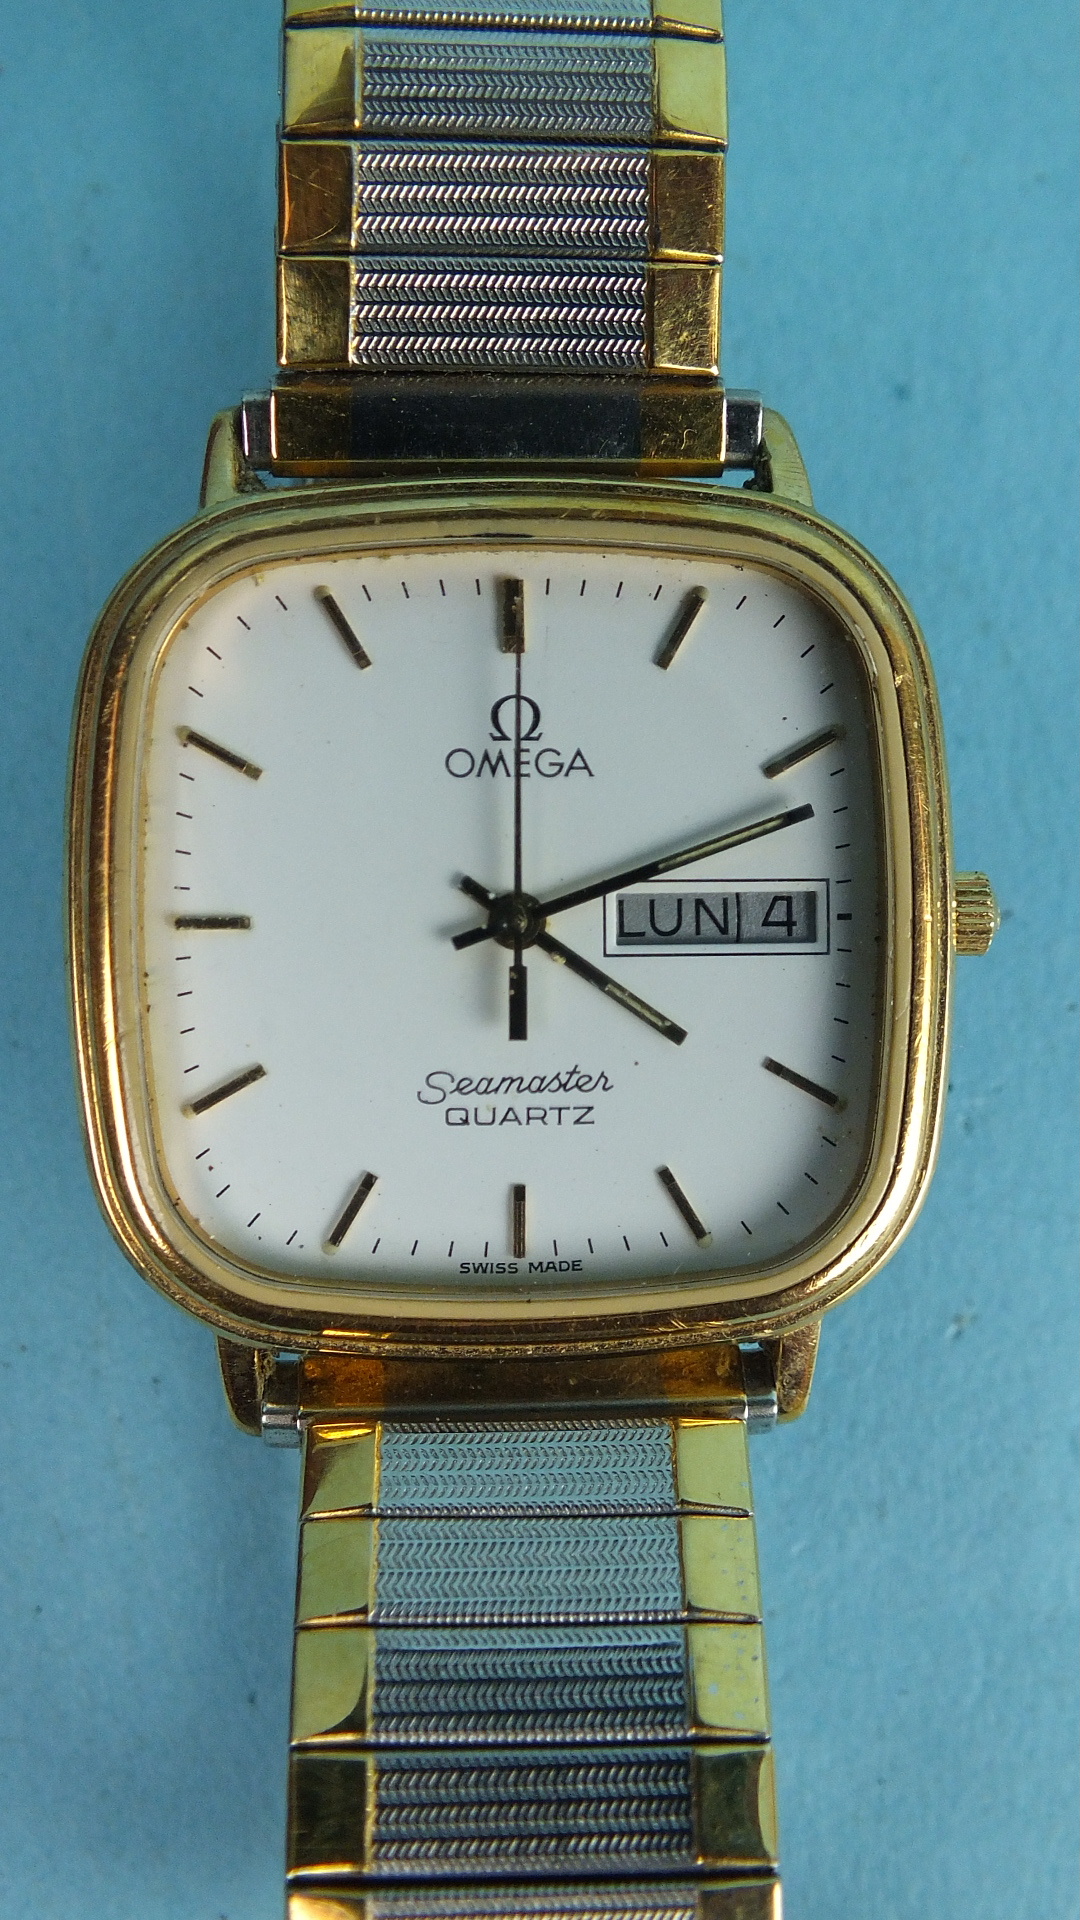 Omega, a gentleman's Omega Seamaster quartz wrist watch with gold-plated rounded-square face,